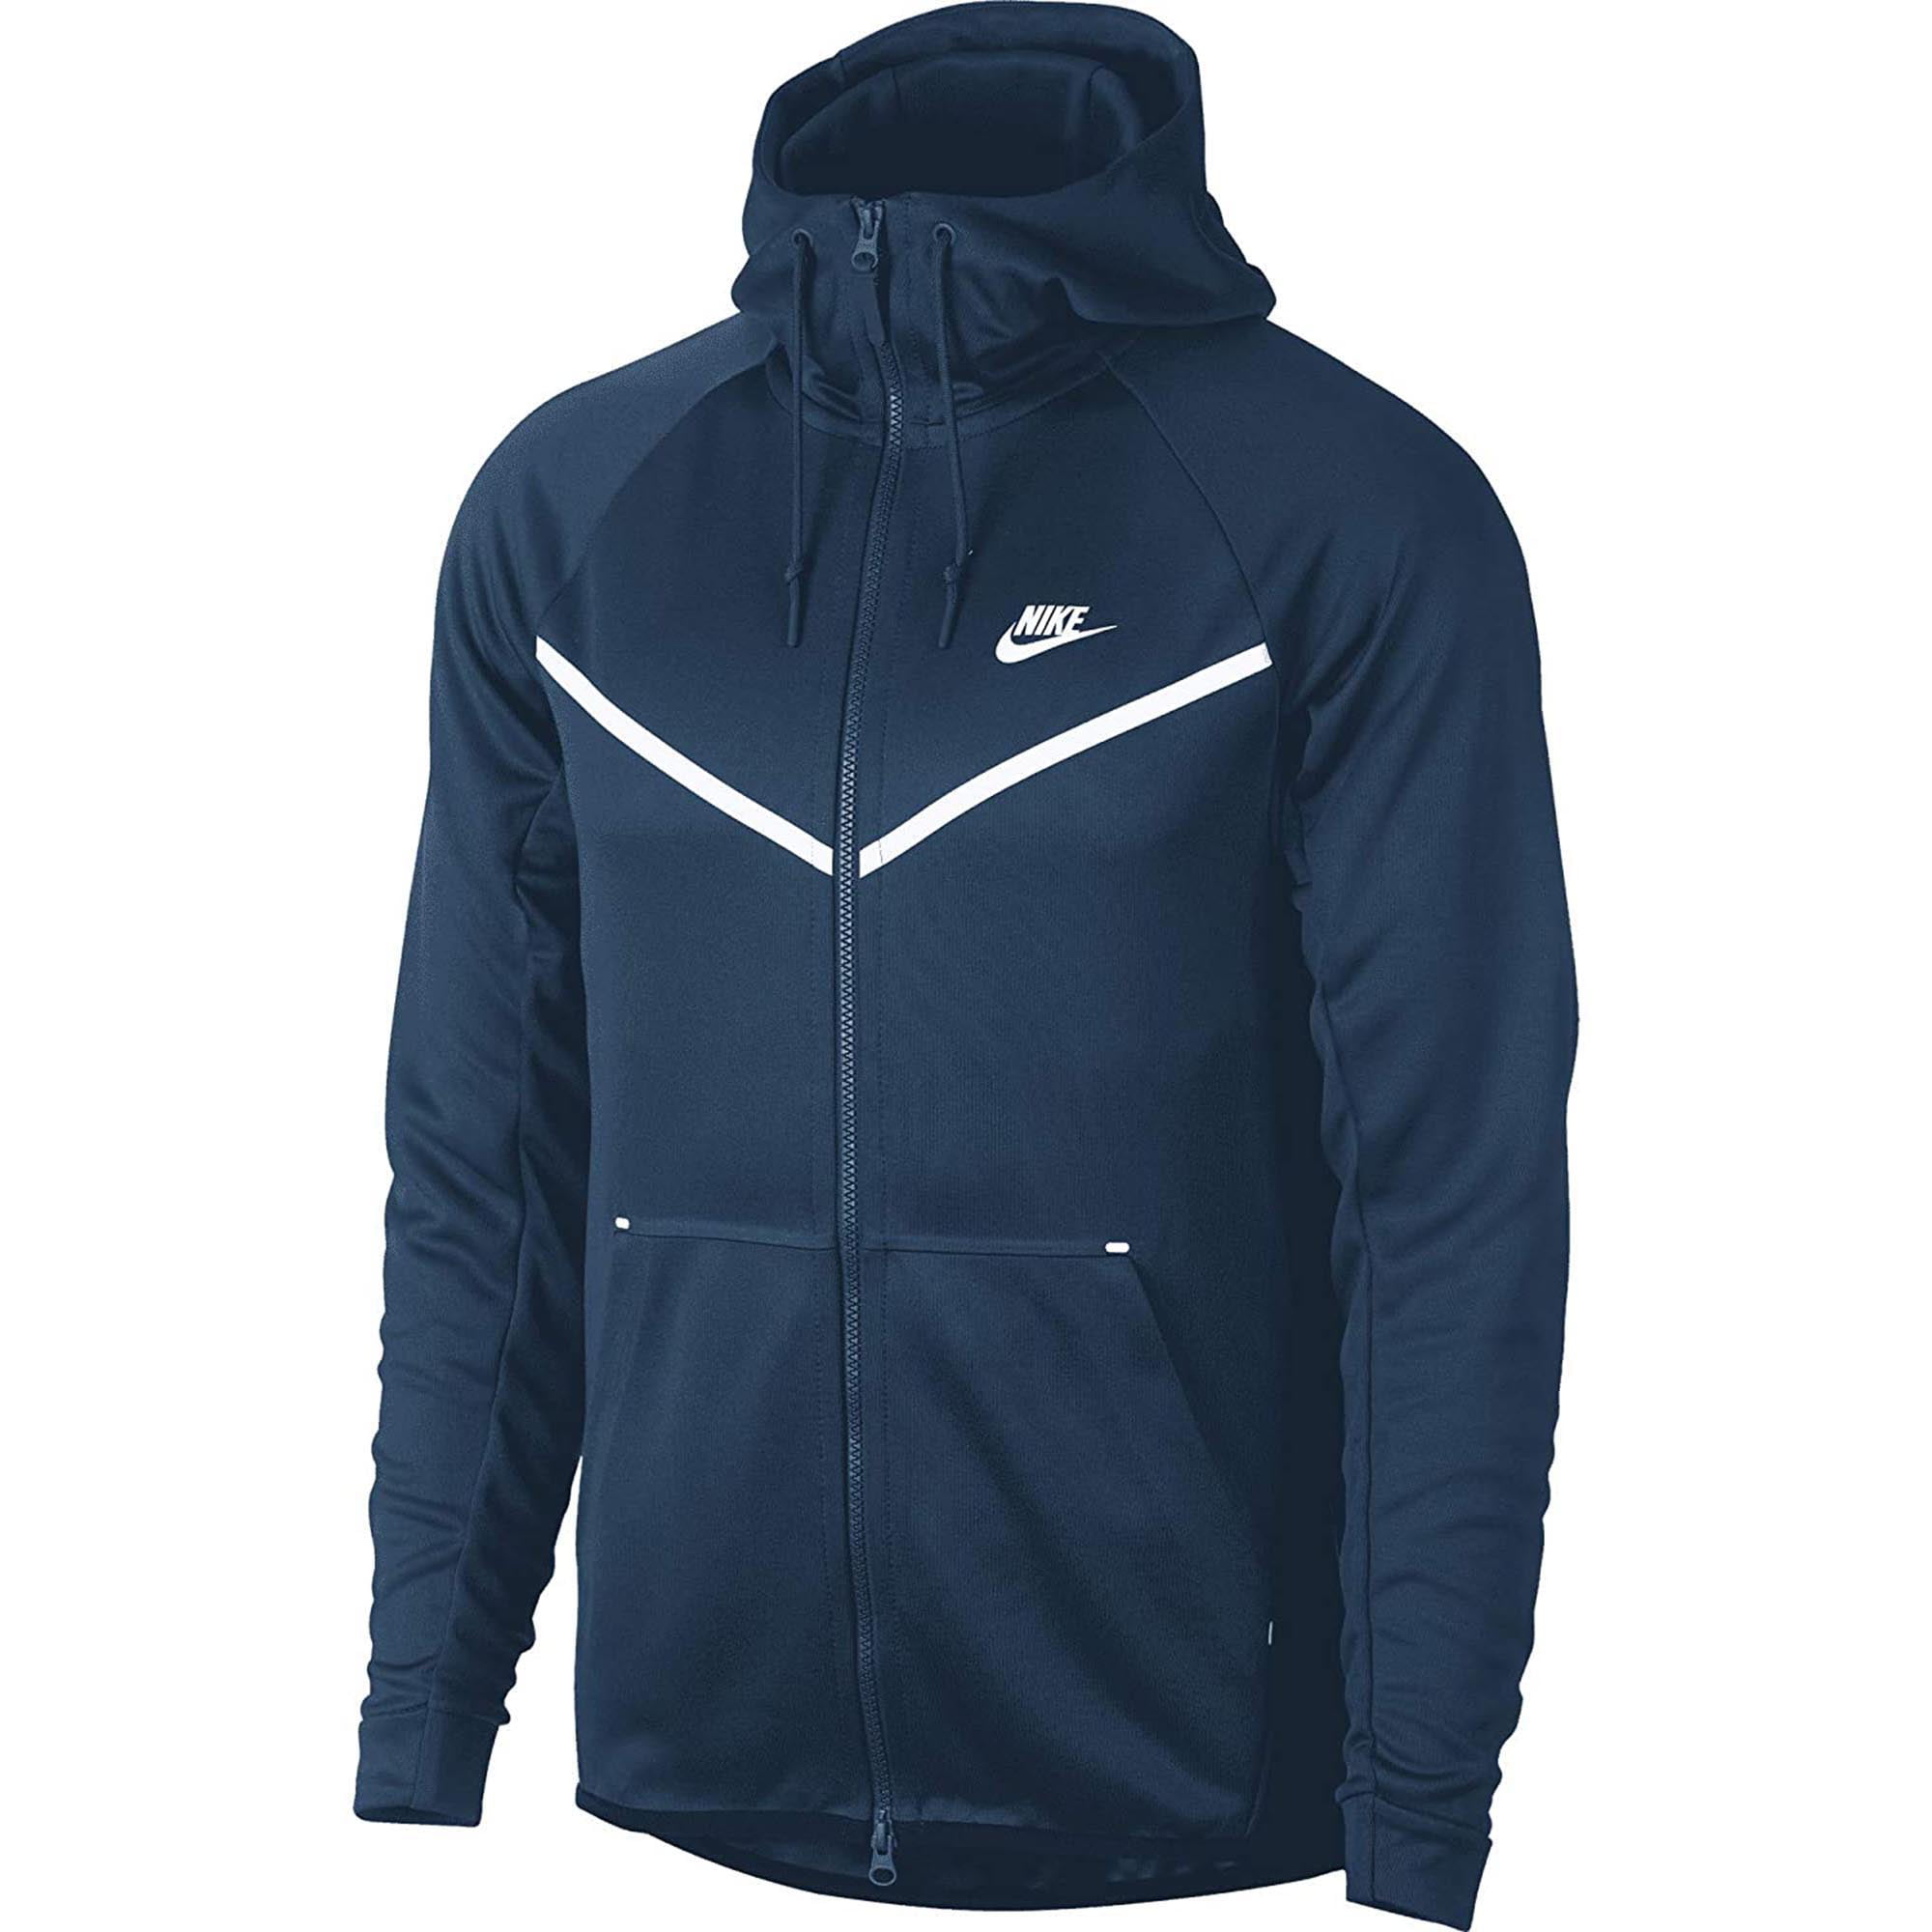 nike jacket with two zippers